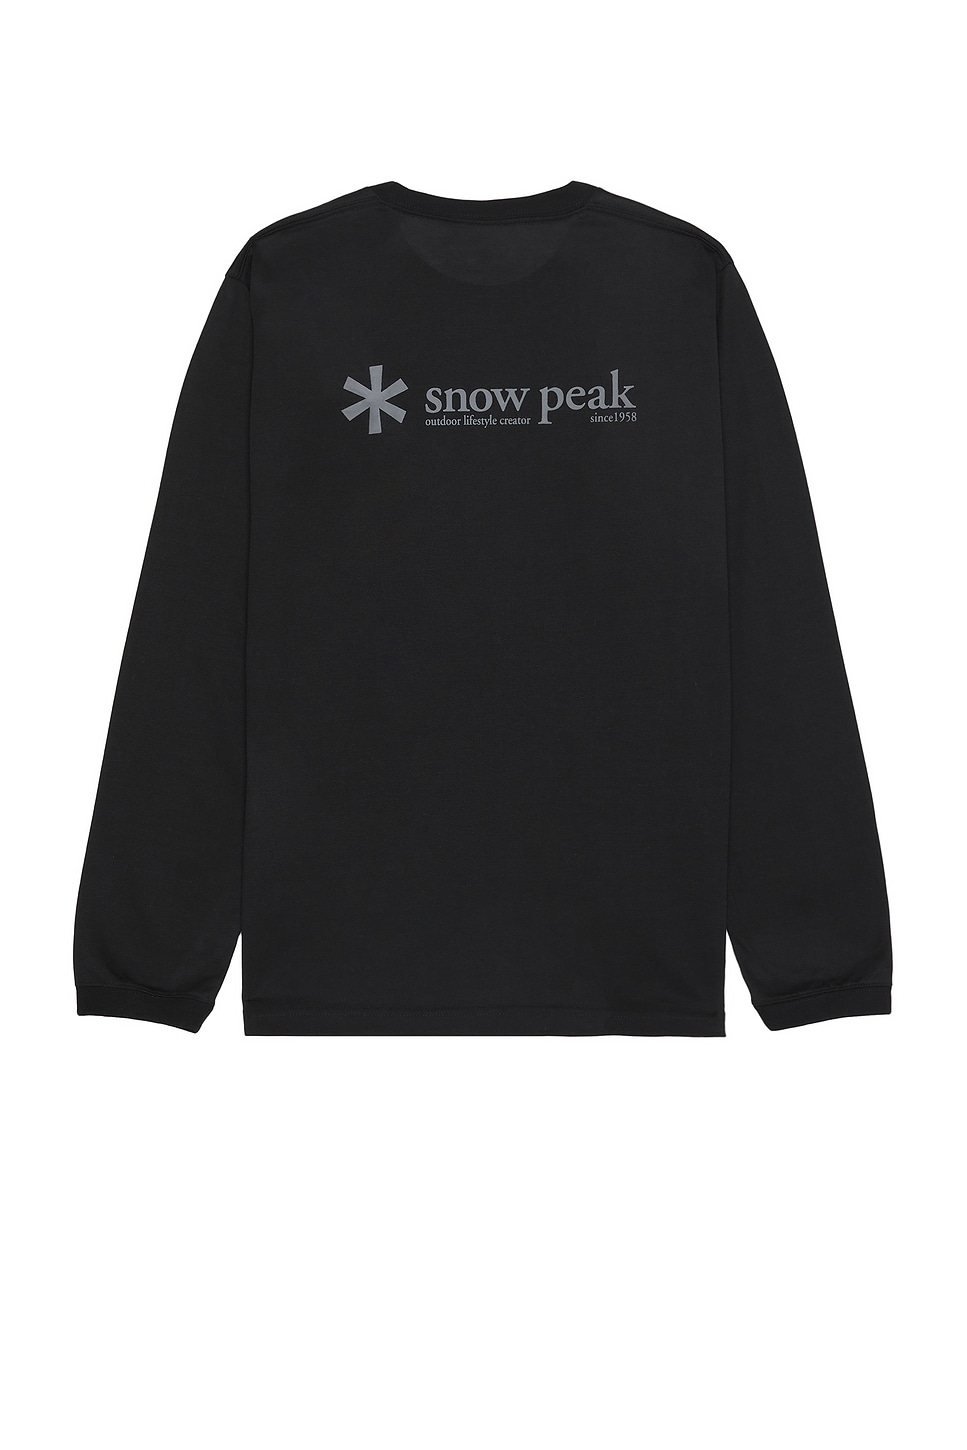 Image 1 of Snow Peak Insect Shield Long Sleeve T-Shirt in Black